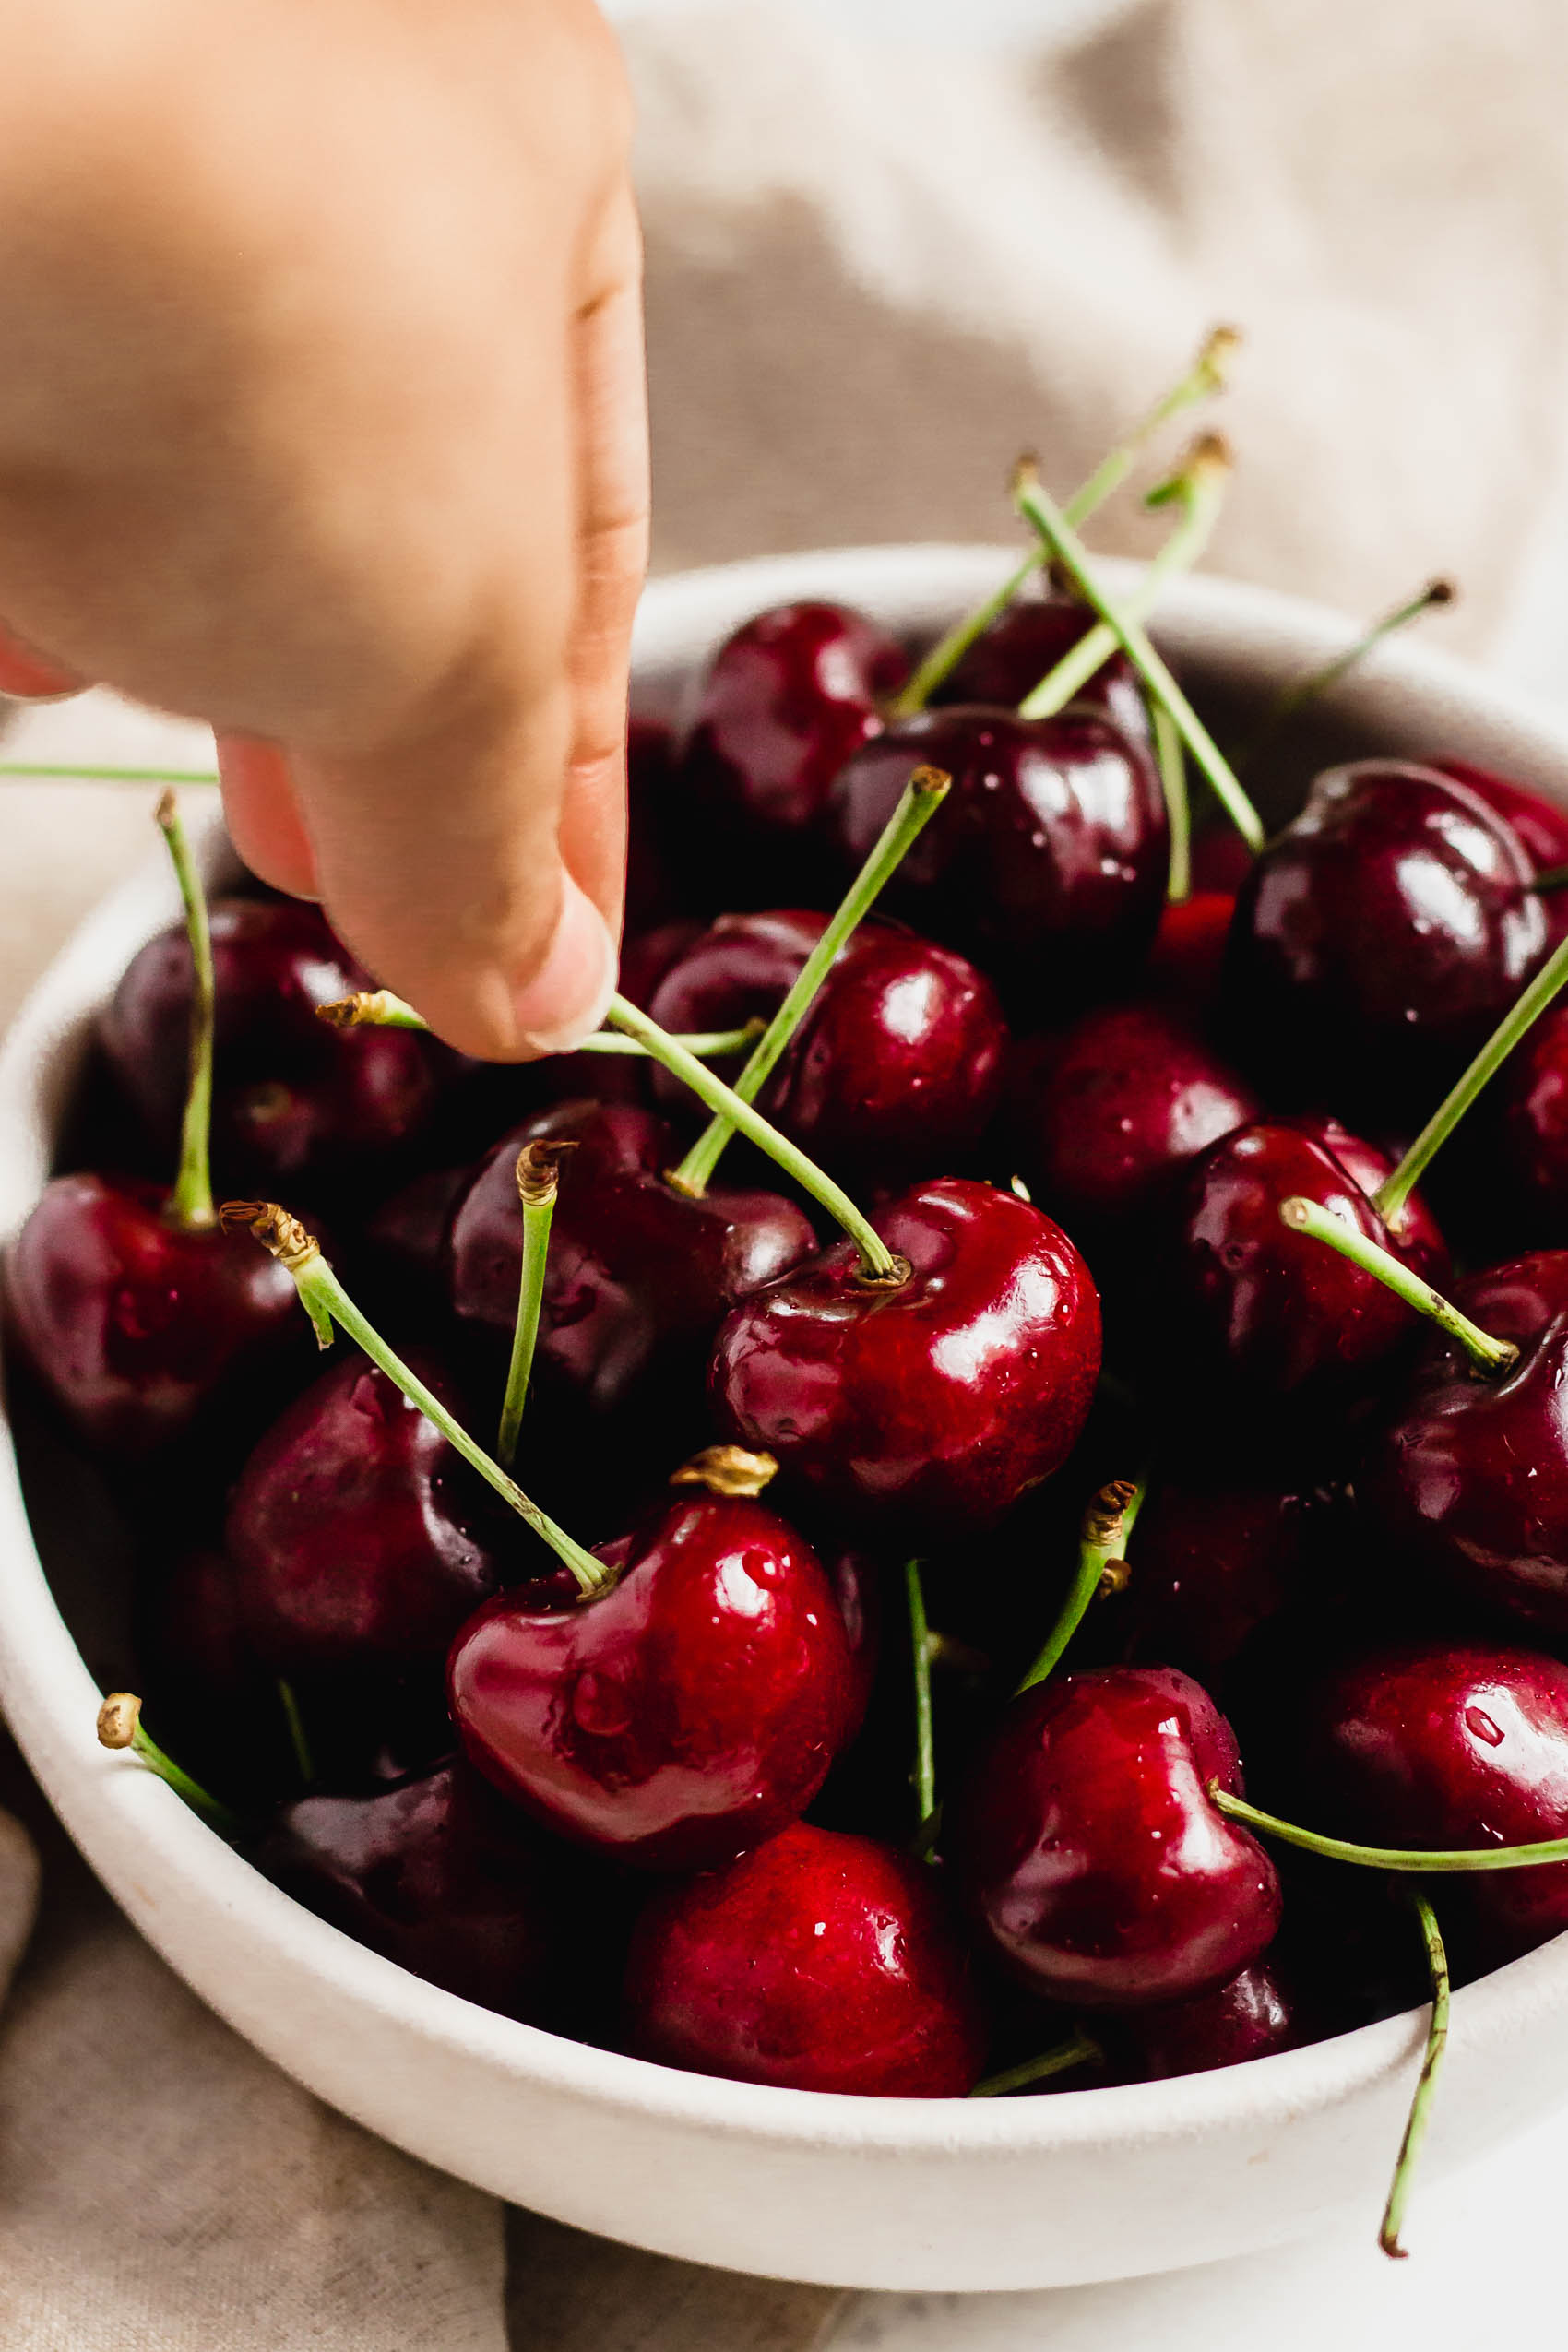 a hand reaching for a cherry out of a bowl